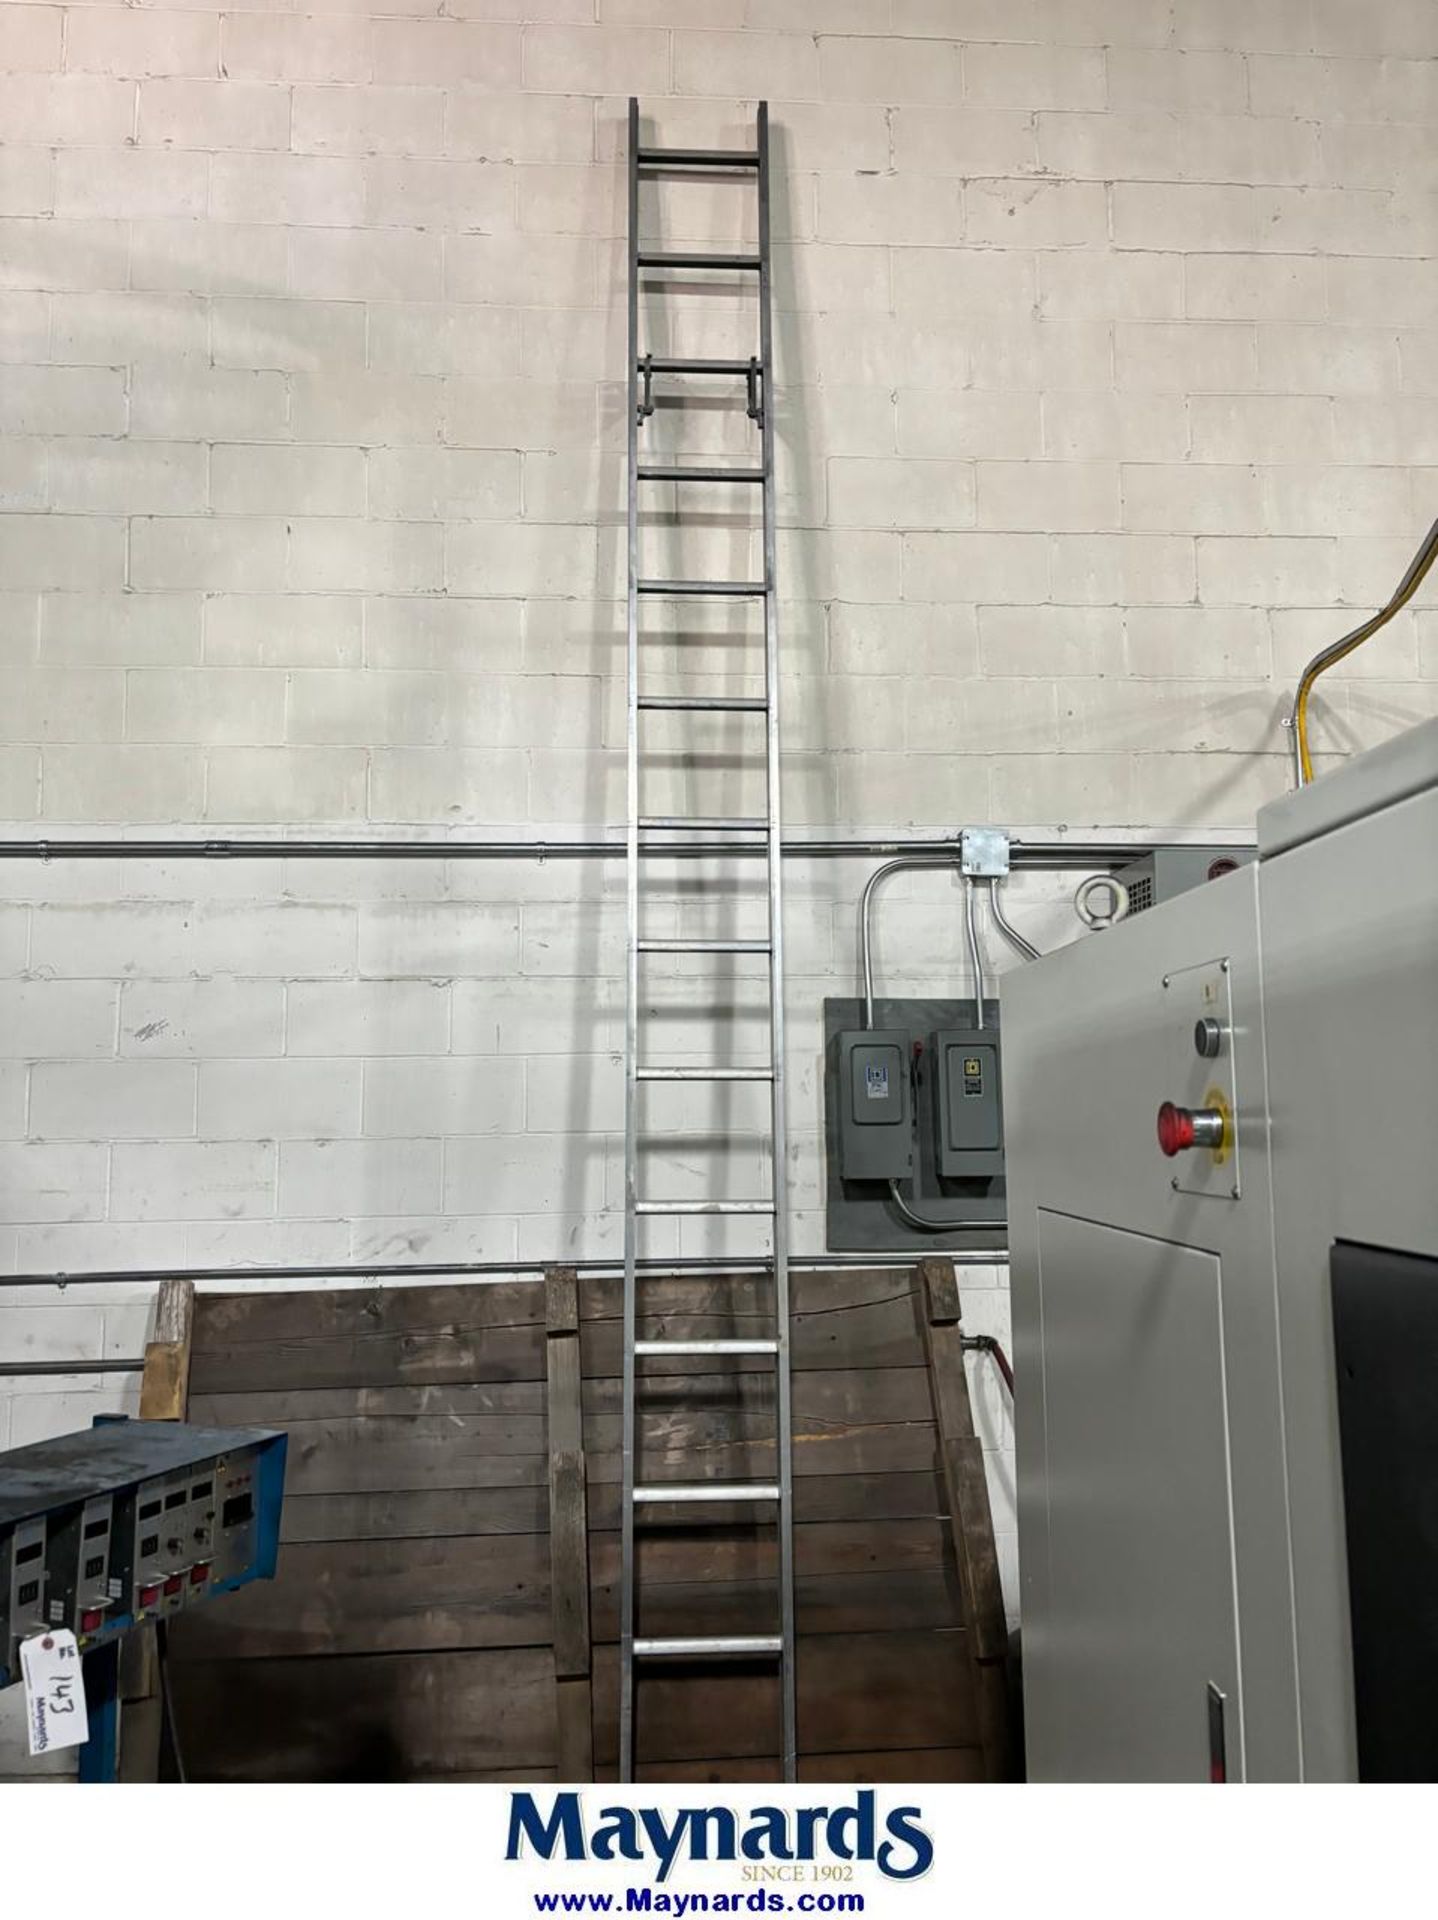 Ladders - Image 2 of 4